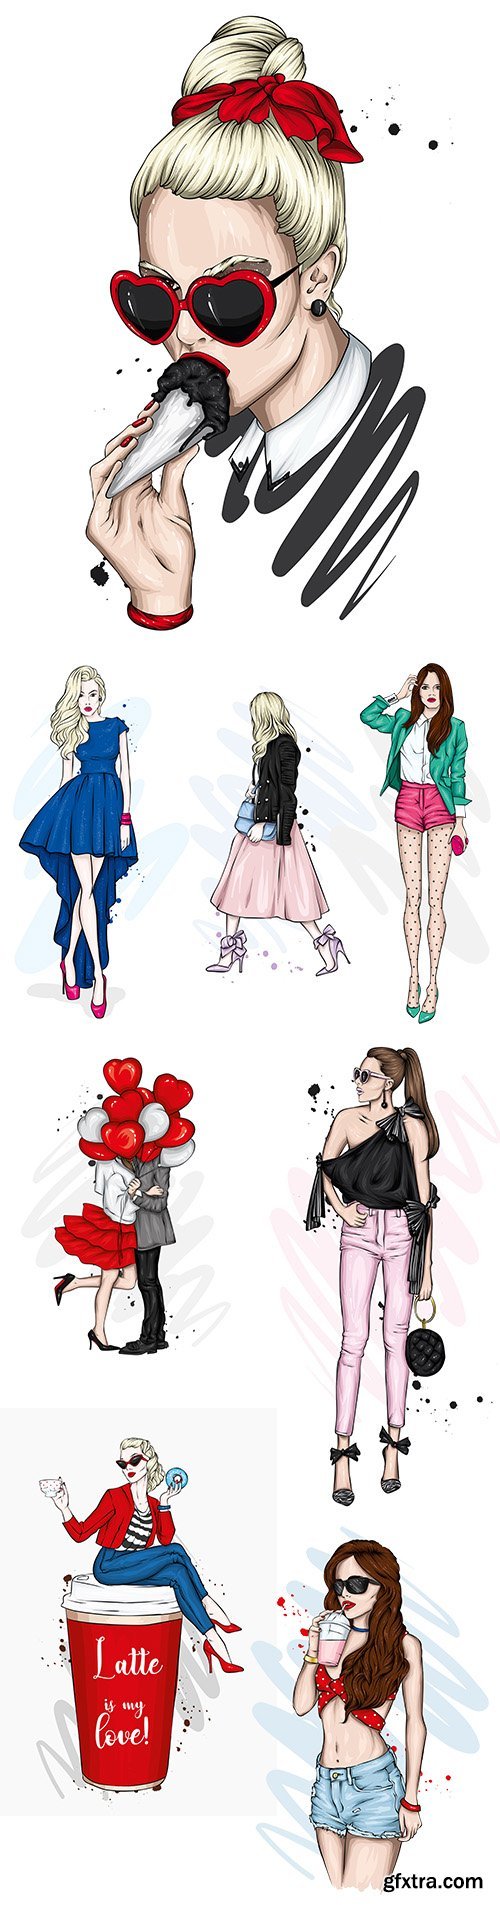 Fashion girl in different stylish clothes with accessories